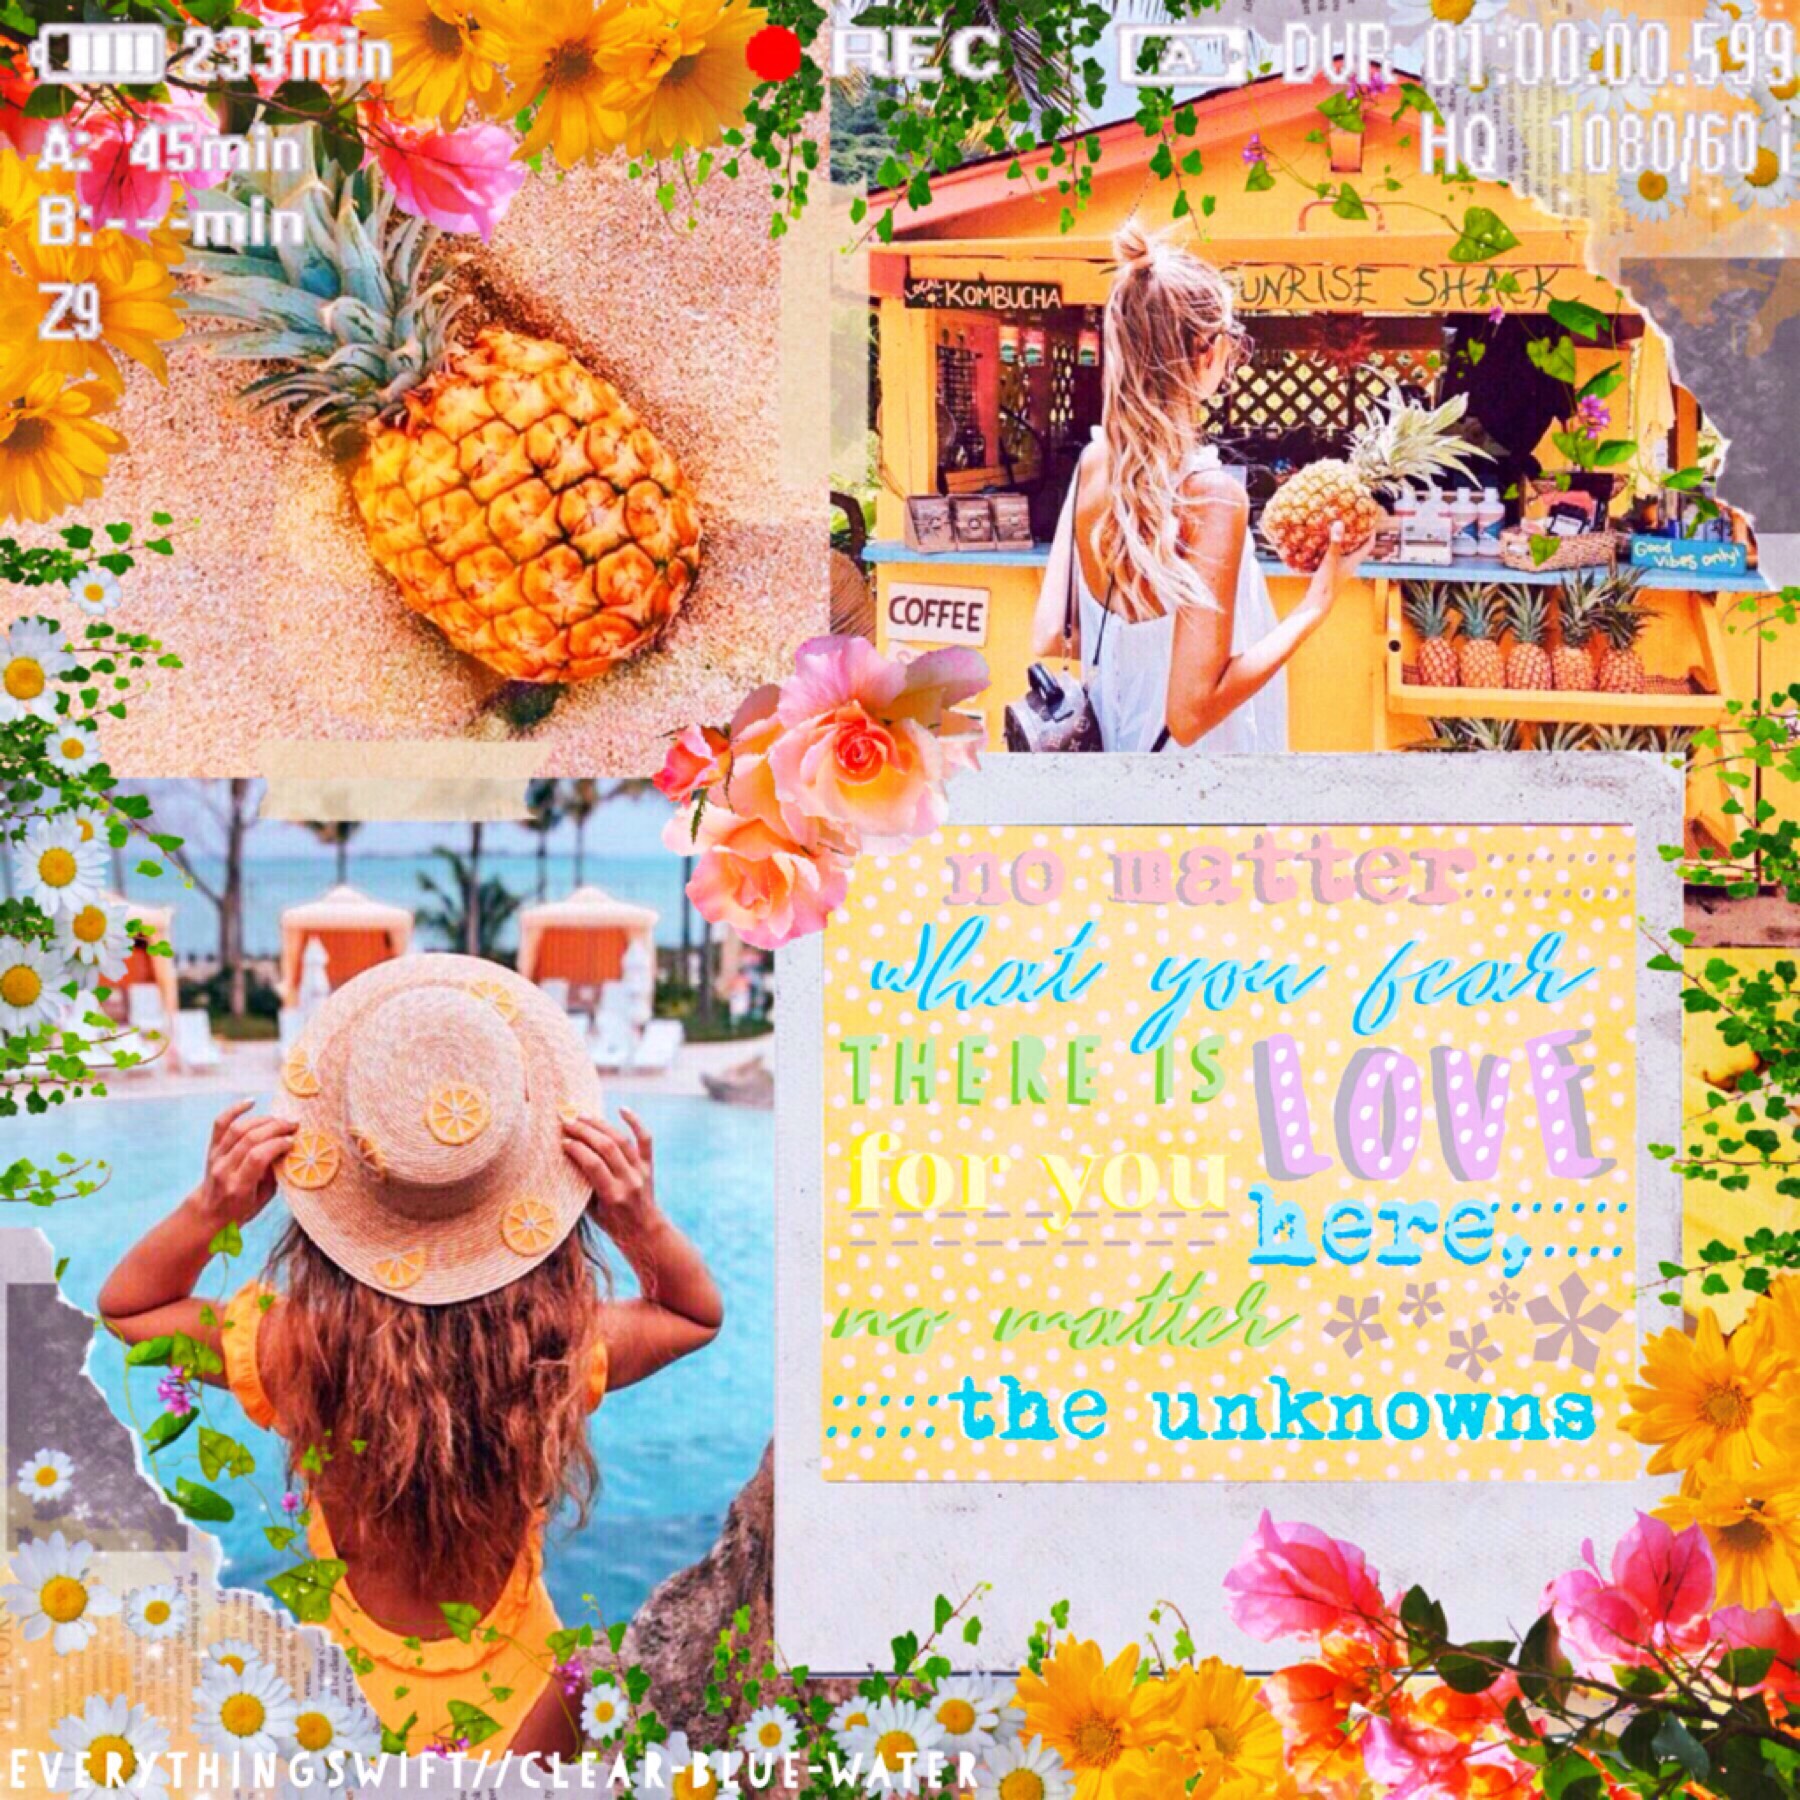 Repost bc of glitch. Collab with my bestie clear-blue-water who did the bg! Tap! 🌸
QOTD: What is your dream vacation?
AOTD: Greece, New Zealand, or anywhere tropical!
